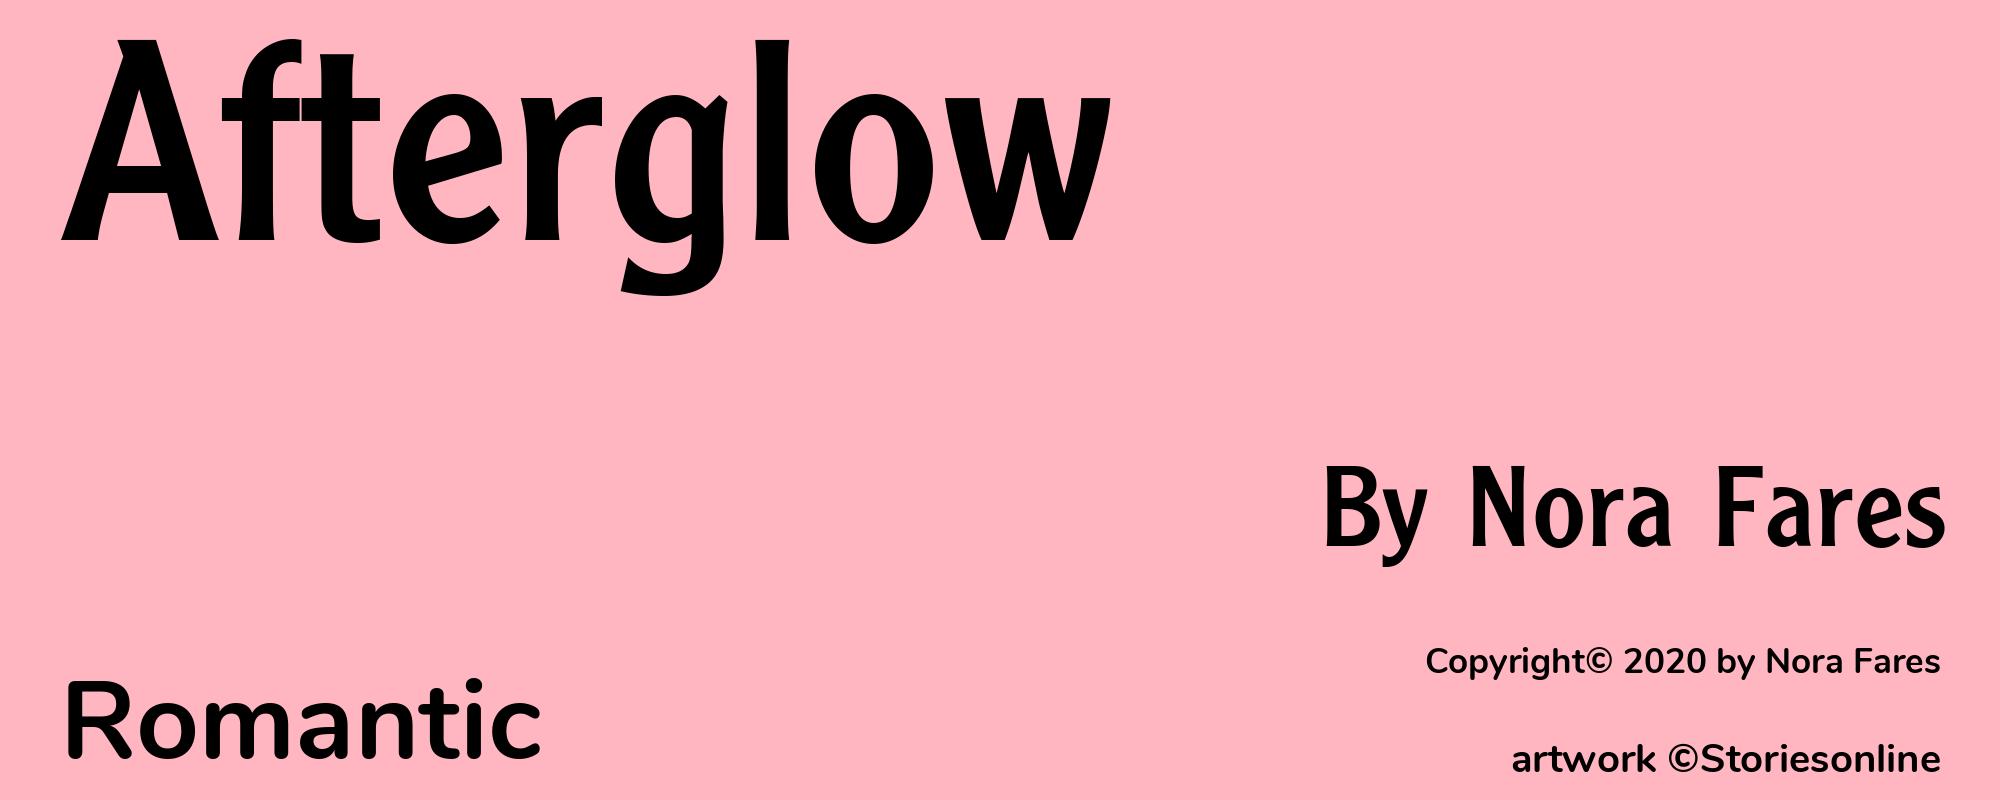 Afterglow - Cover